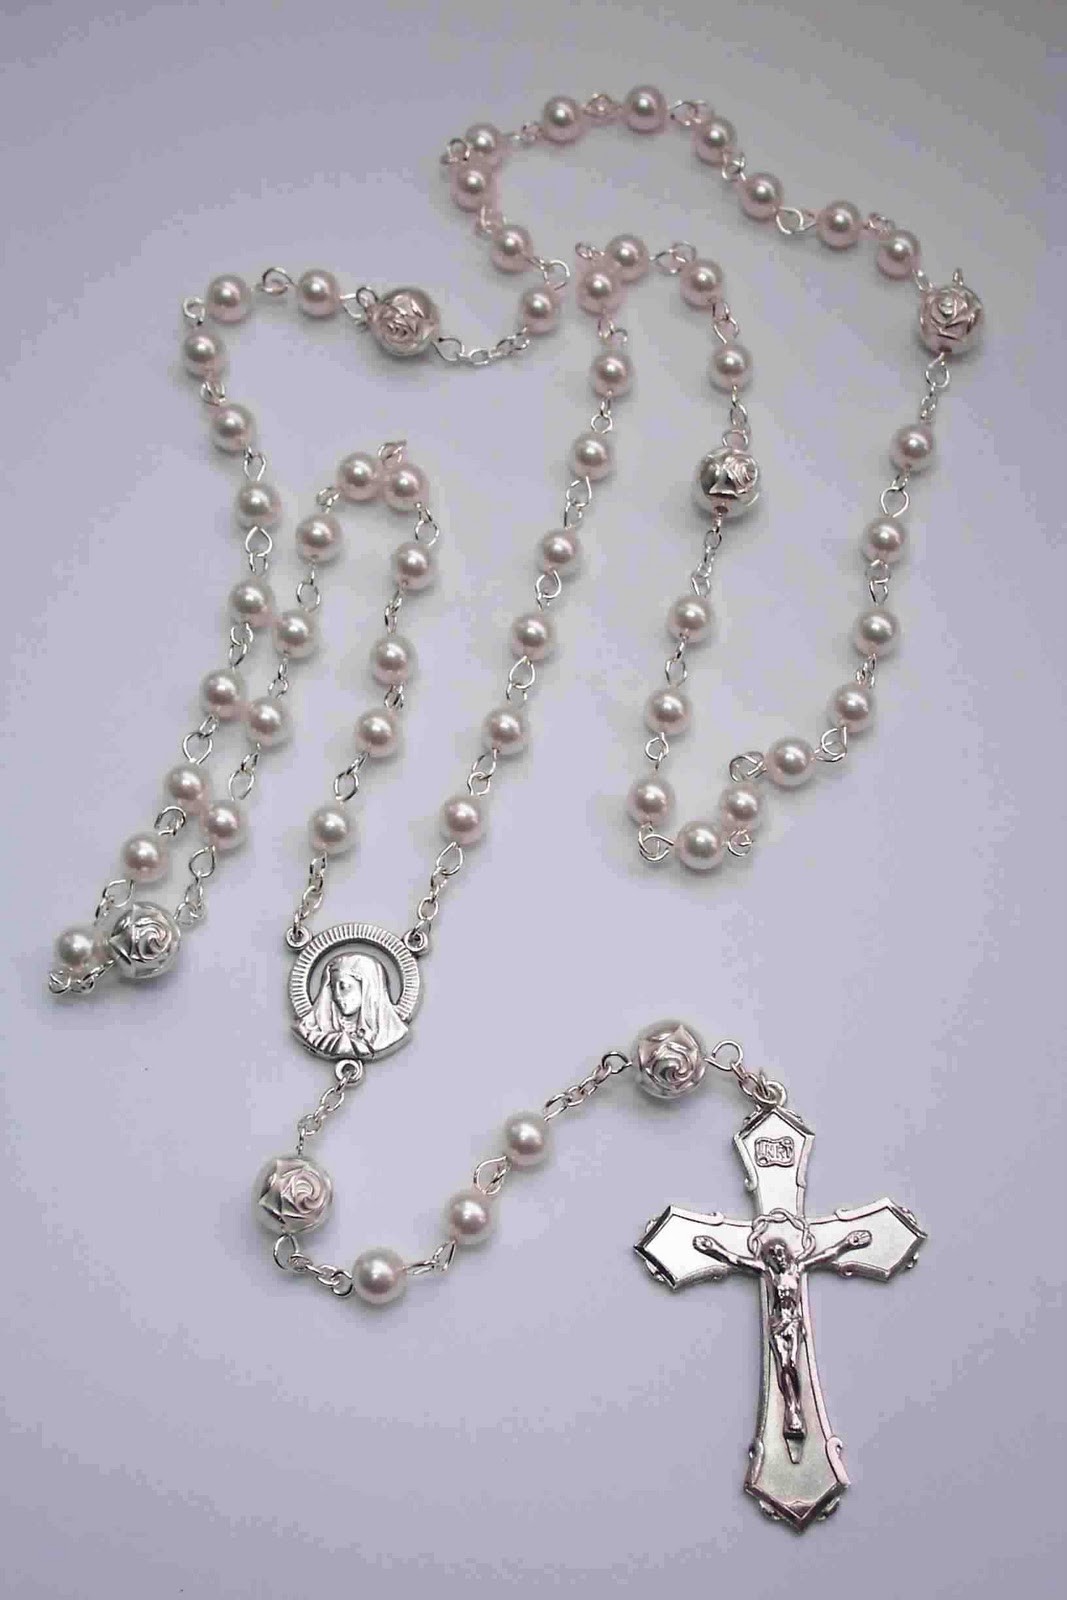 Rosary Beads Wallpaper The History Of